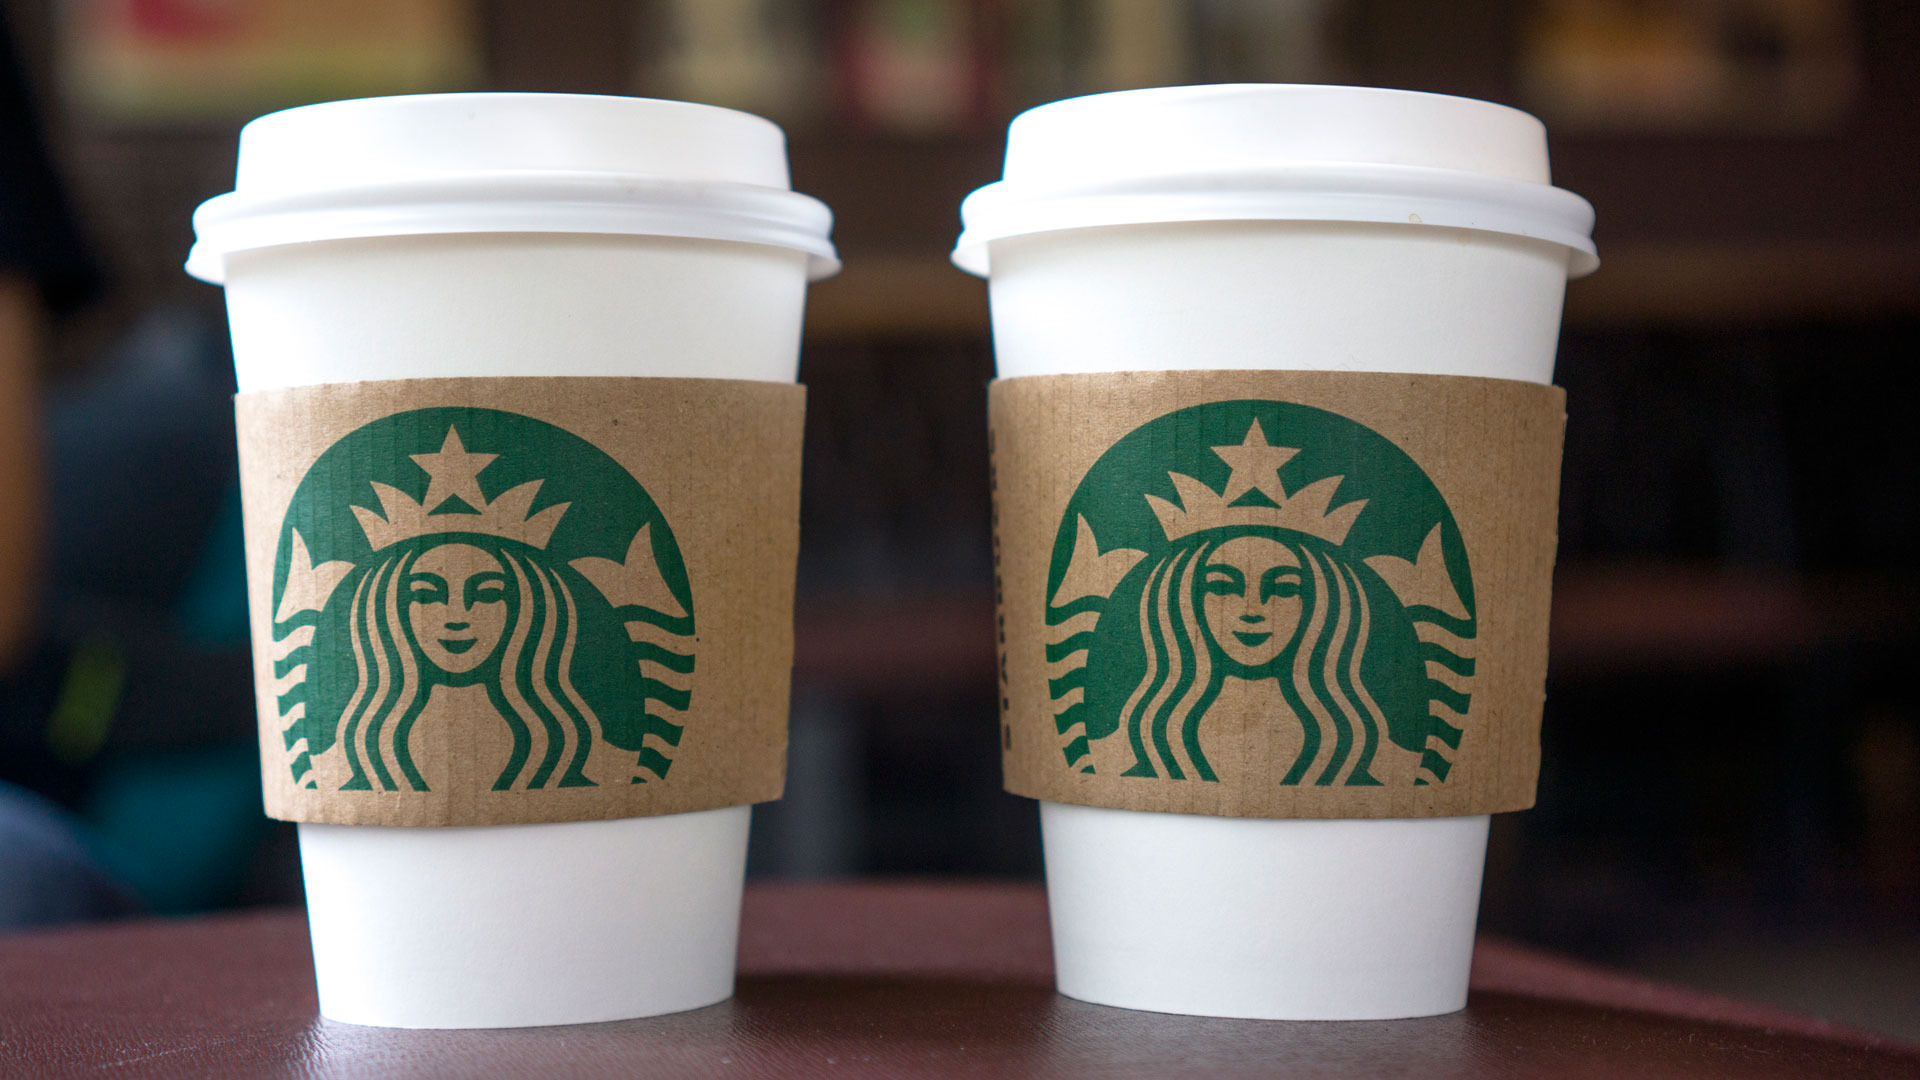 Starbucks Cup To Go - HD Wallpaper 